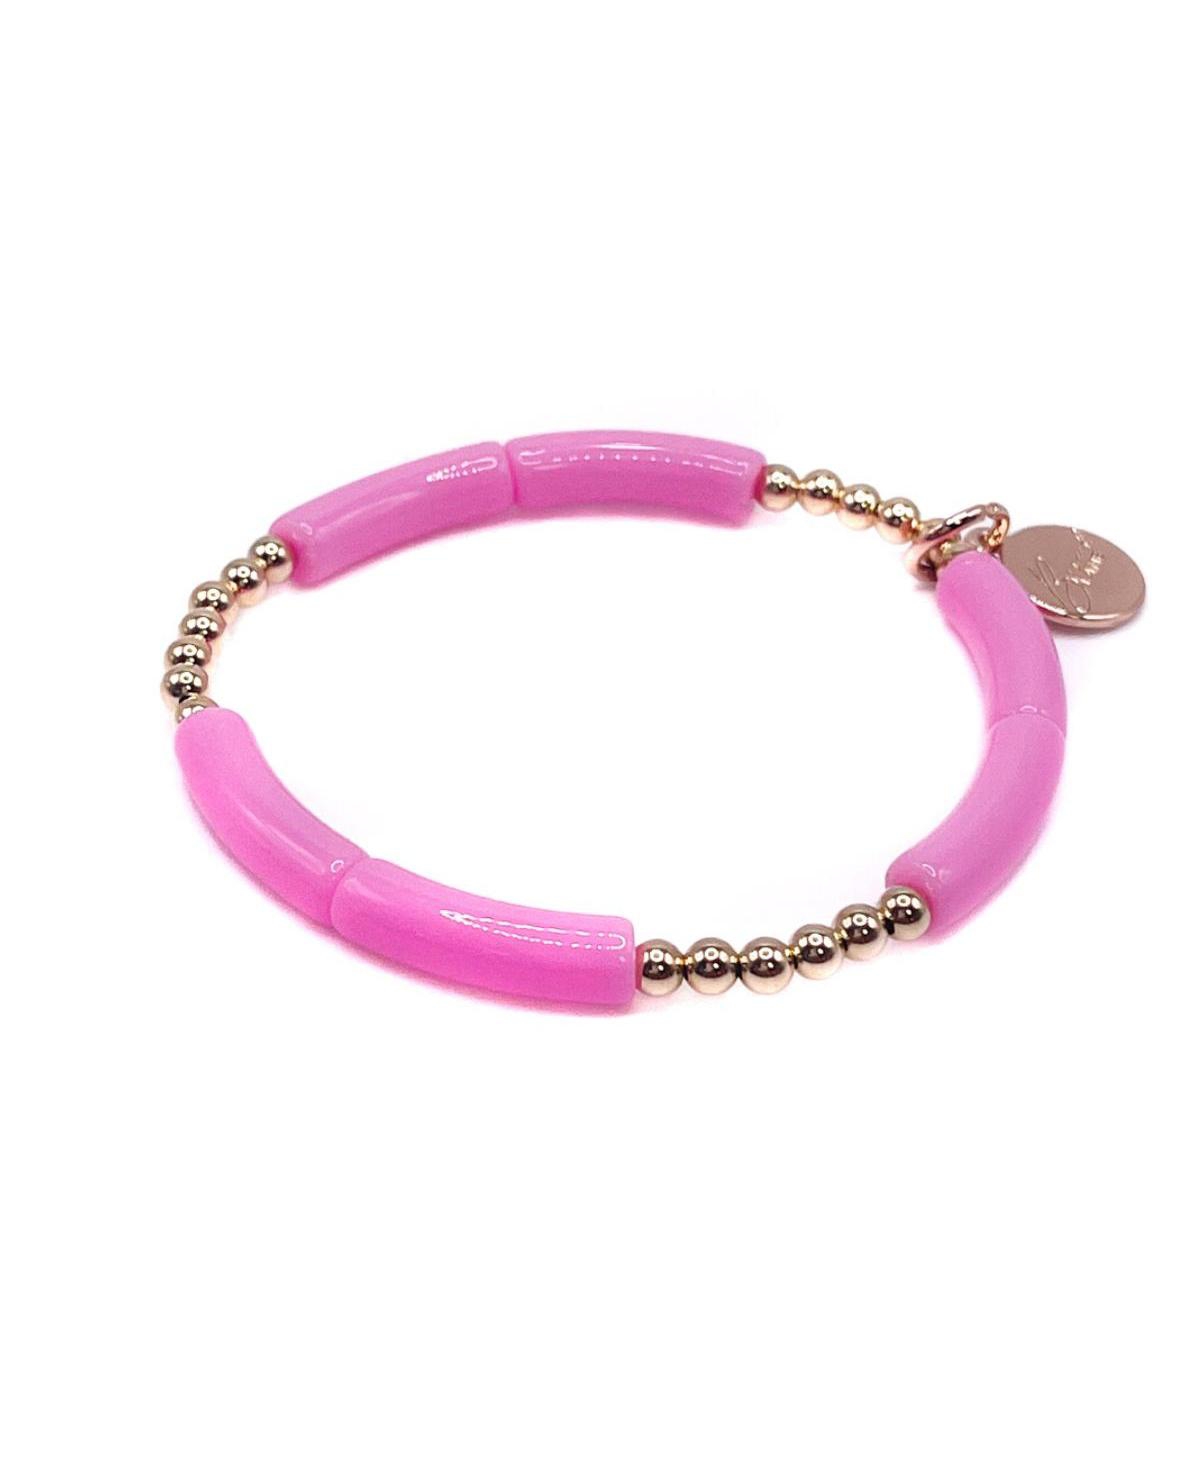 Non-Tarnishing Gold filled, 4mm Gold Ball and Acrylic Stretch Bracelet - Perfect pink